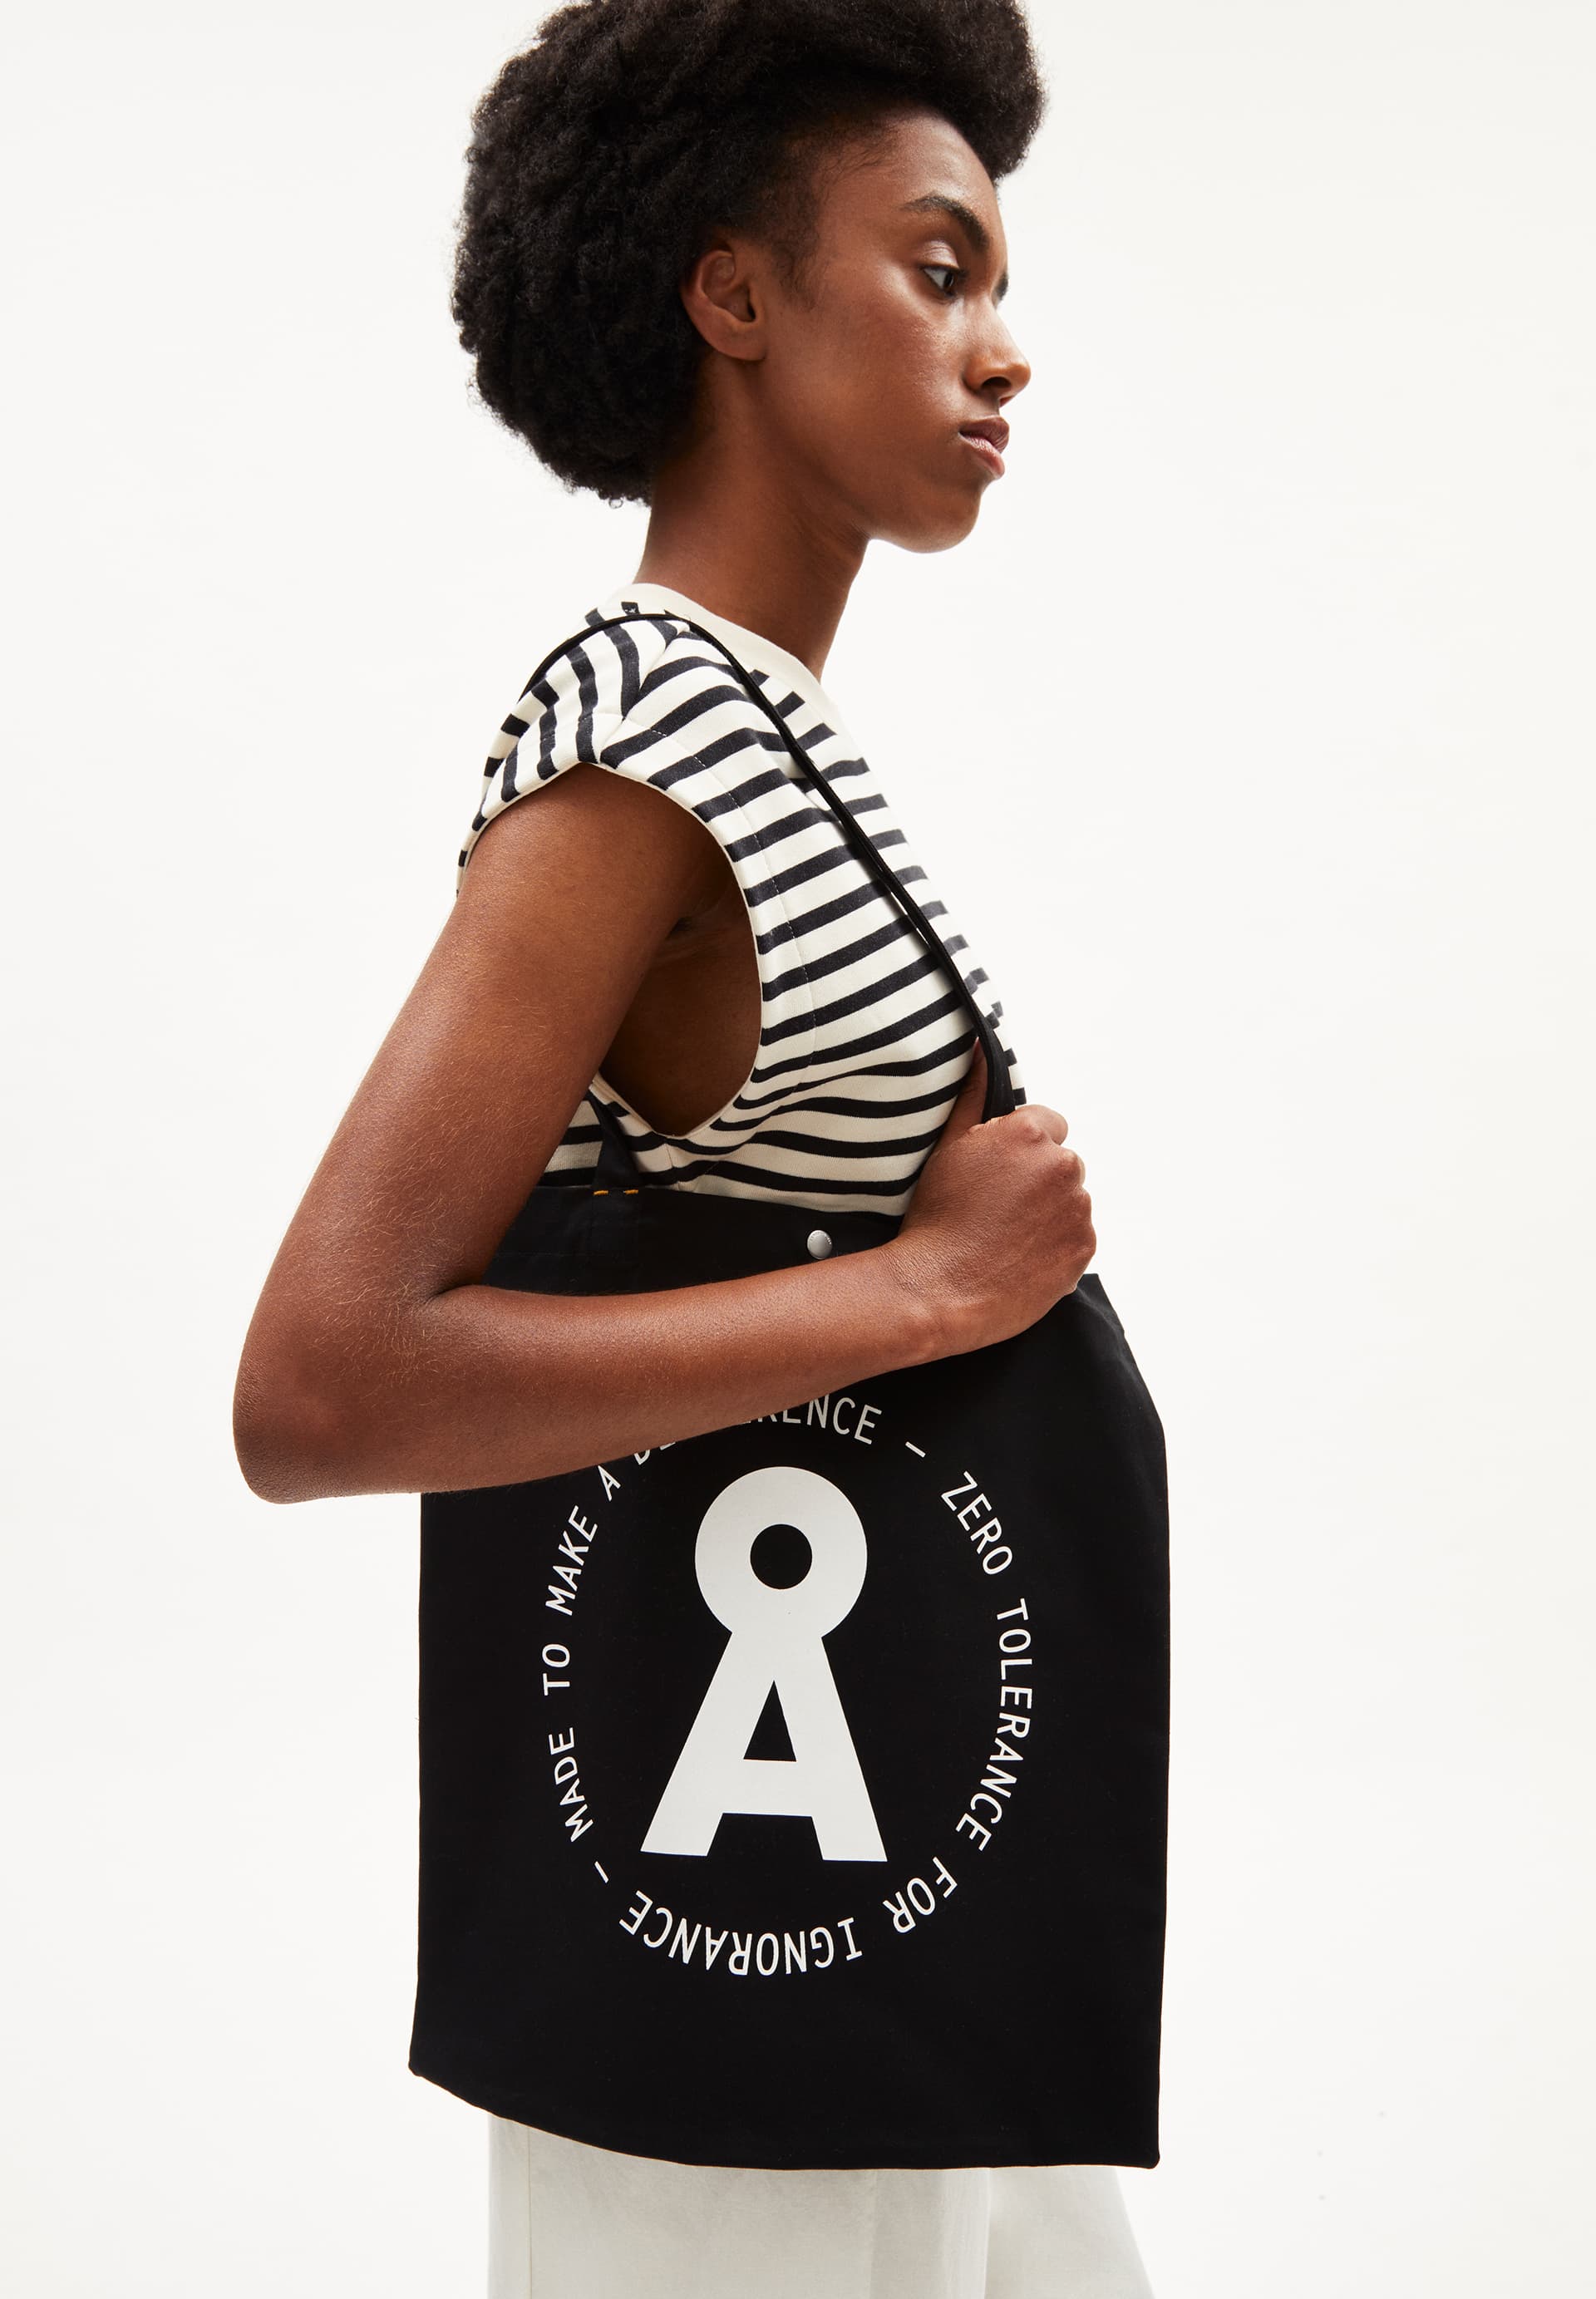 JONAA OPEN MINDED Tote Bag made of Organic Cotton Mix